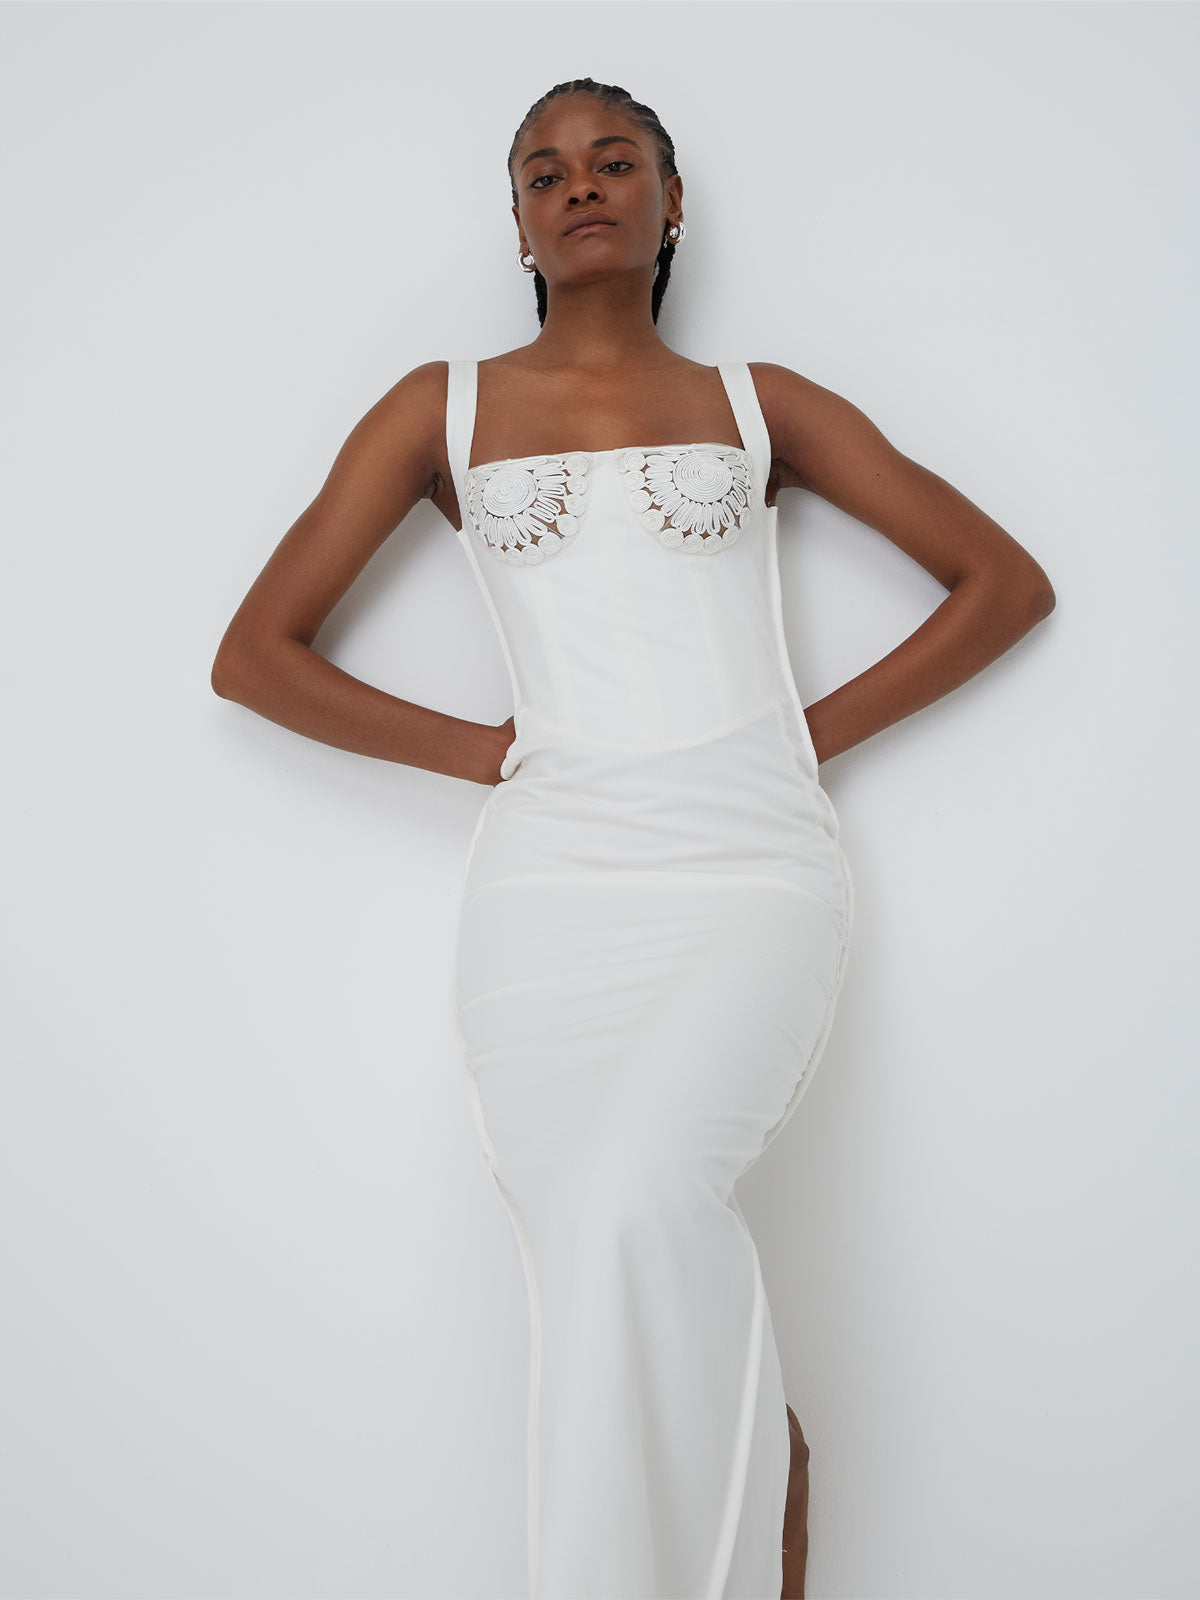 A female figure leaning back against a wall with her arms held behind her lower back wearing the White 09 Micah Dress